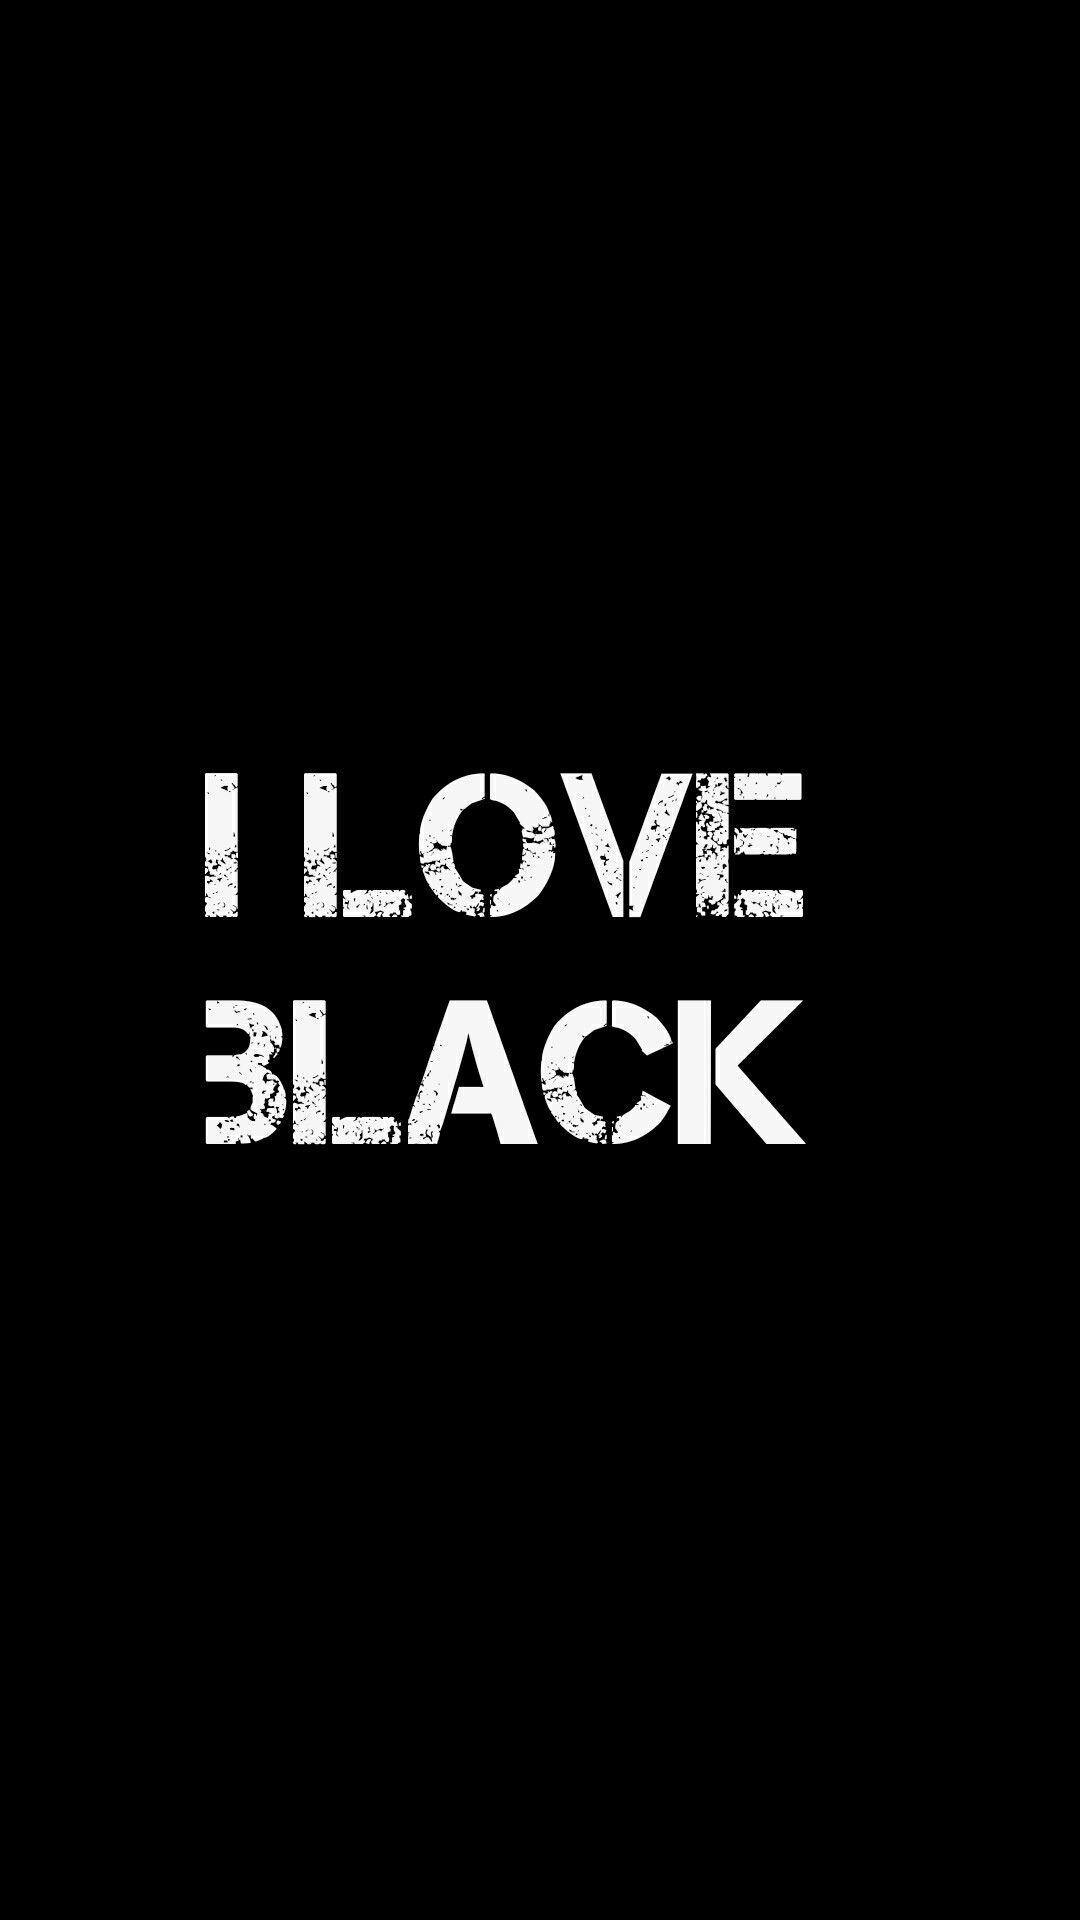 Love Black And White iPhone Background. Black wallpaper, Emo wallpaper, Love wallpaper background